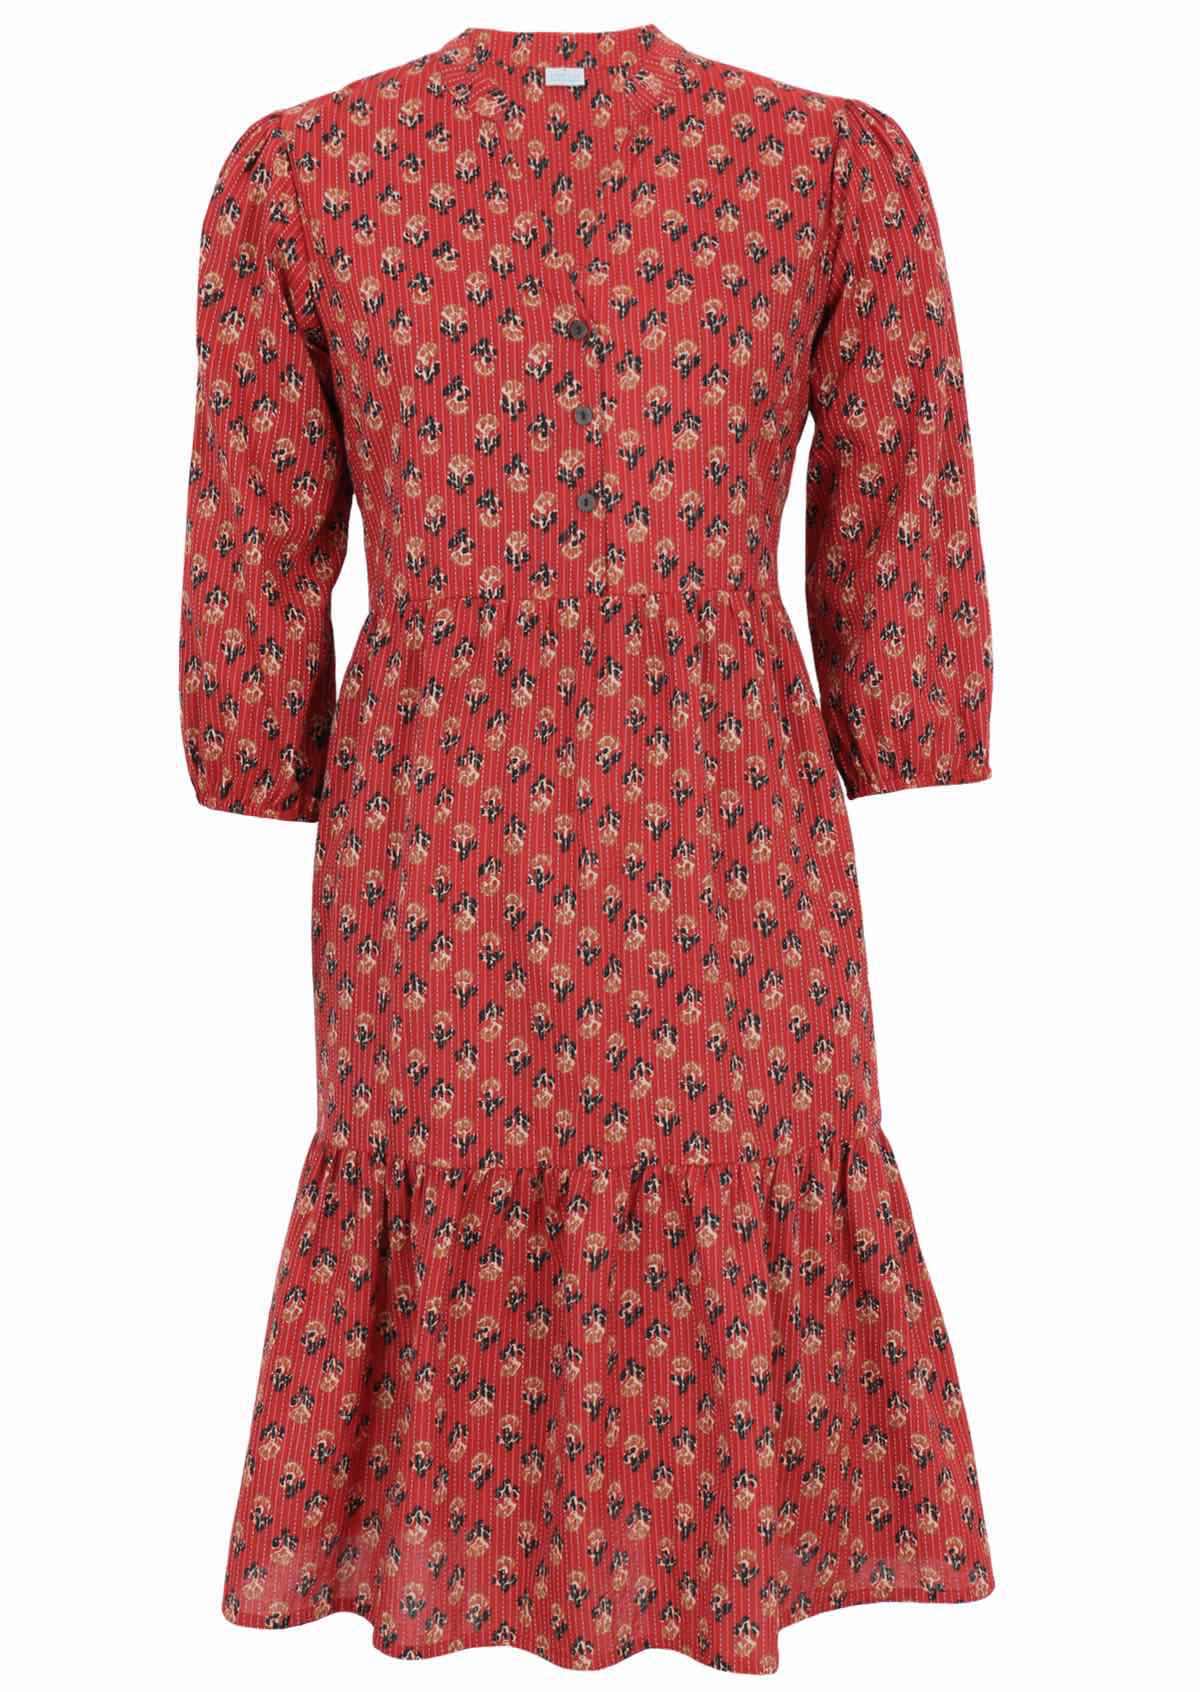 100% cotton dress with decorative florals on a red base. 